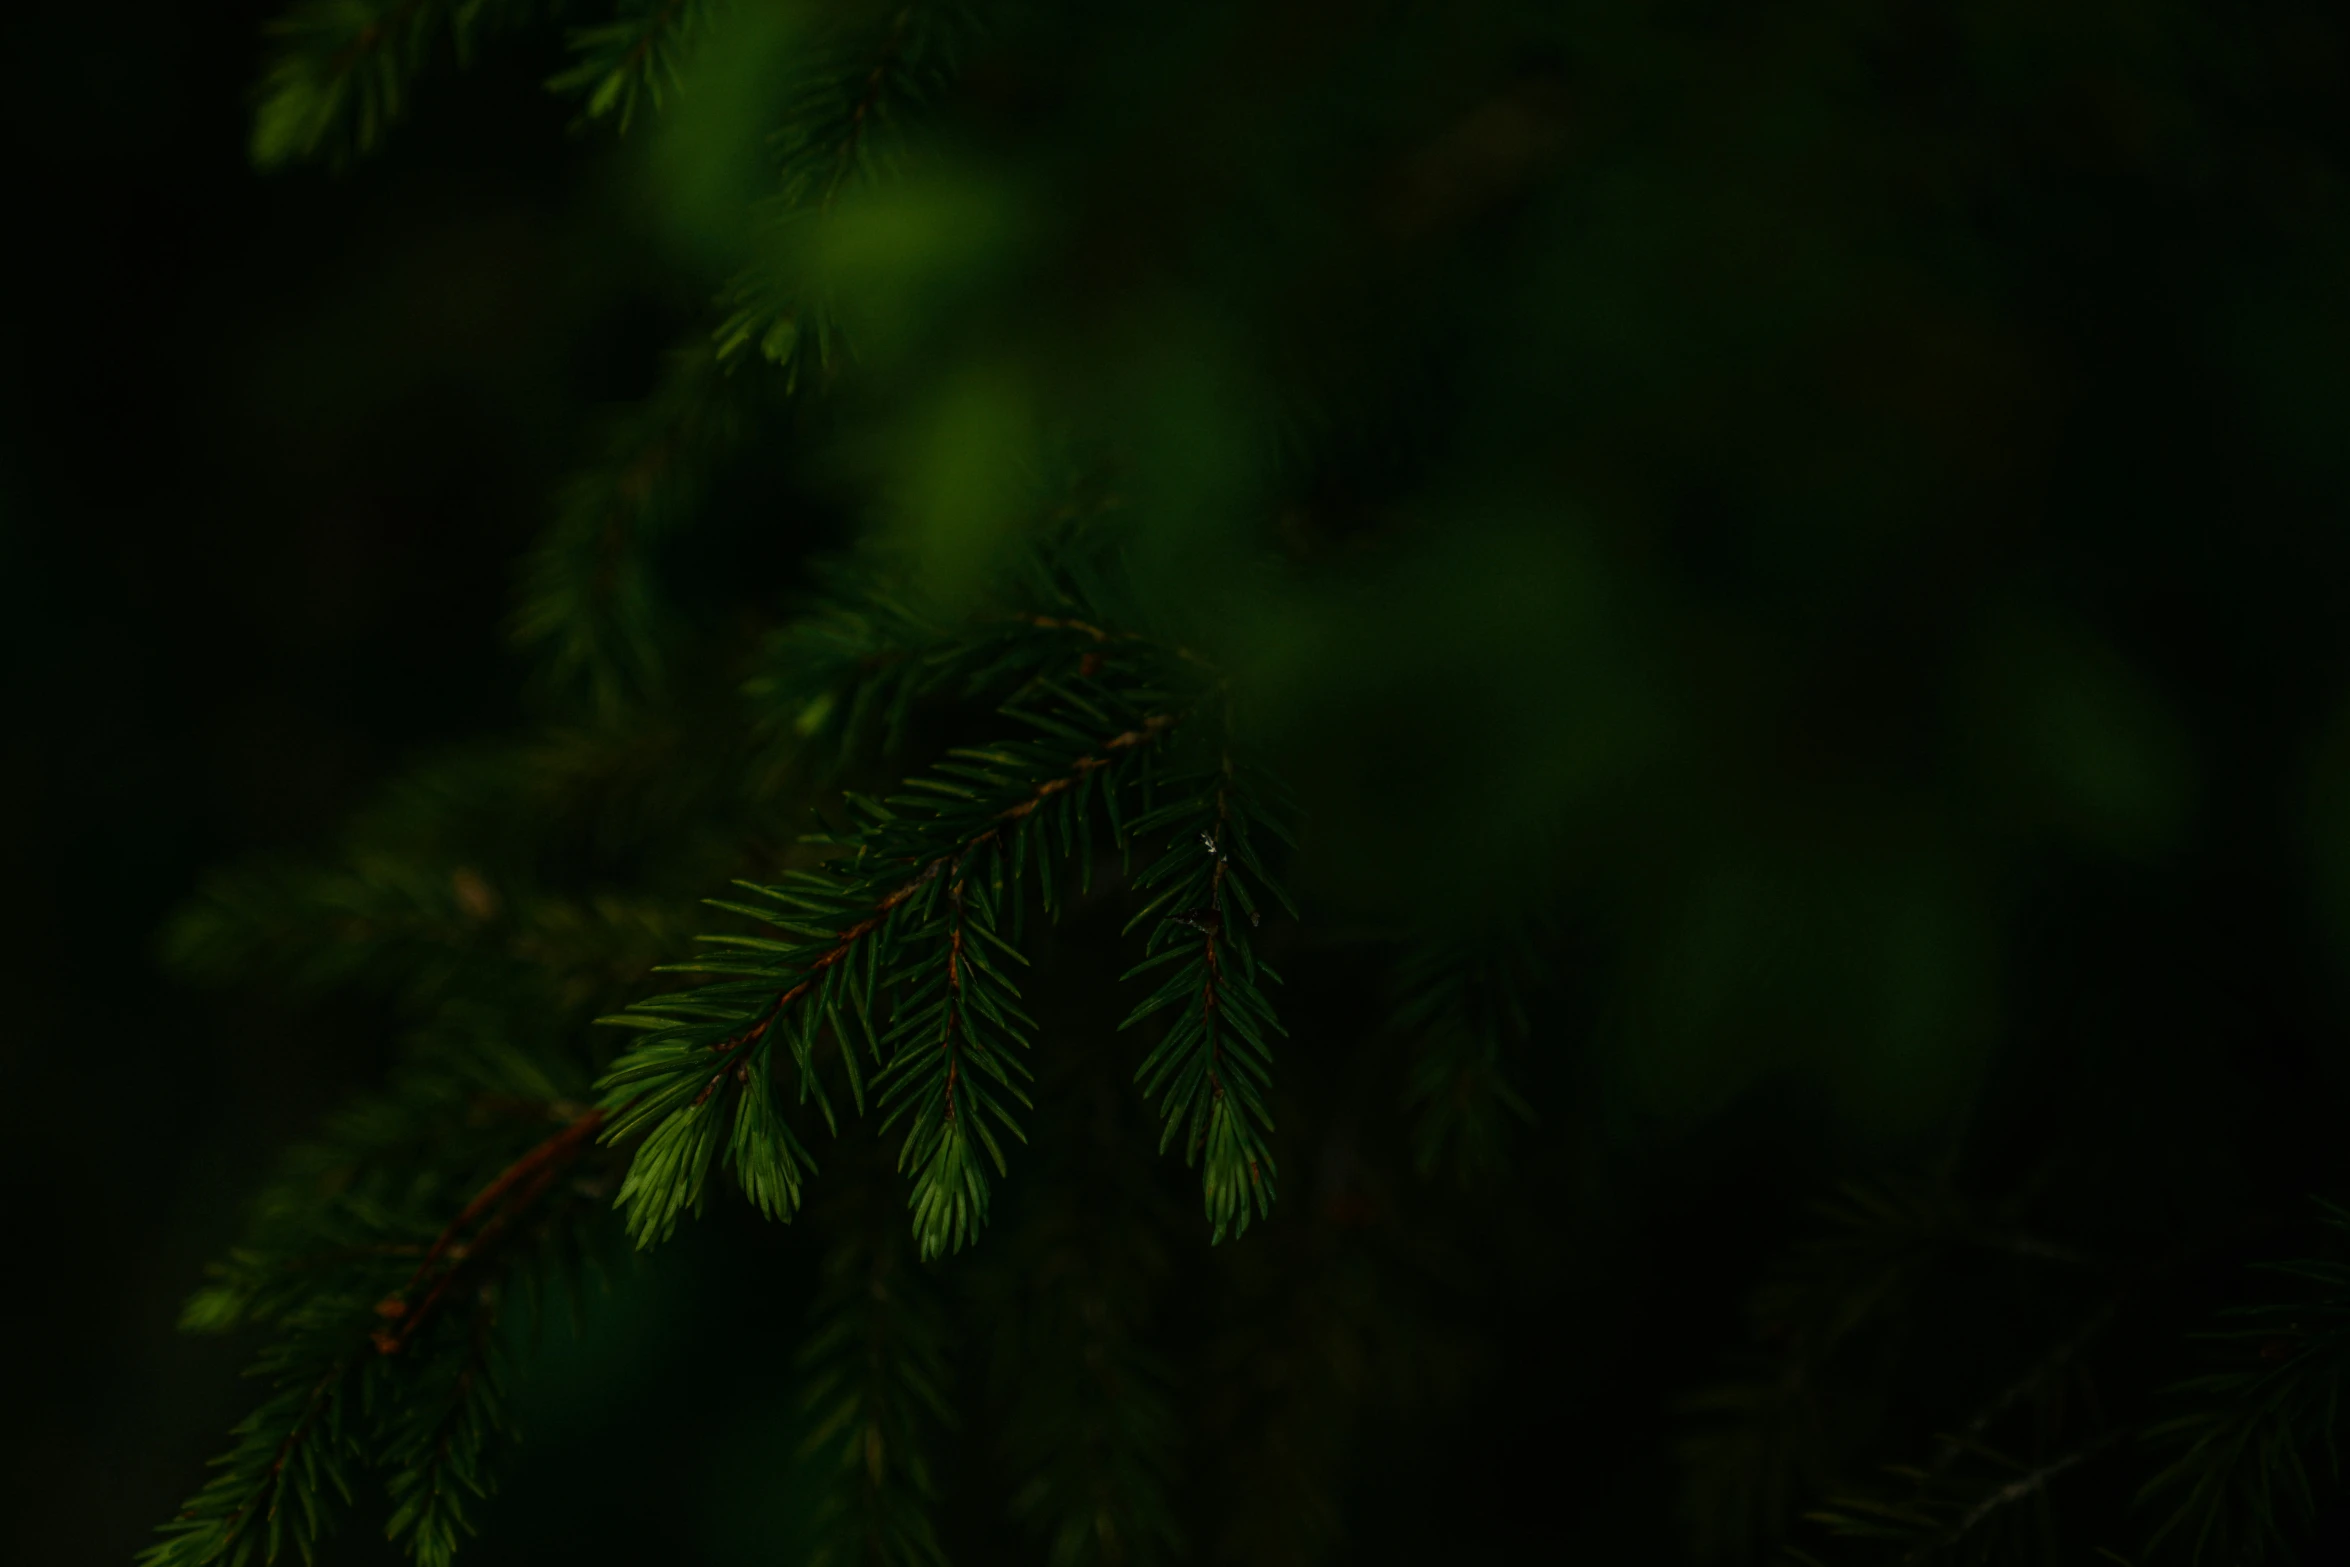 nches of a pine tree with green needles